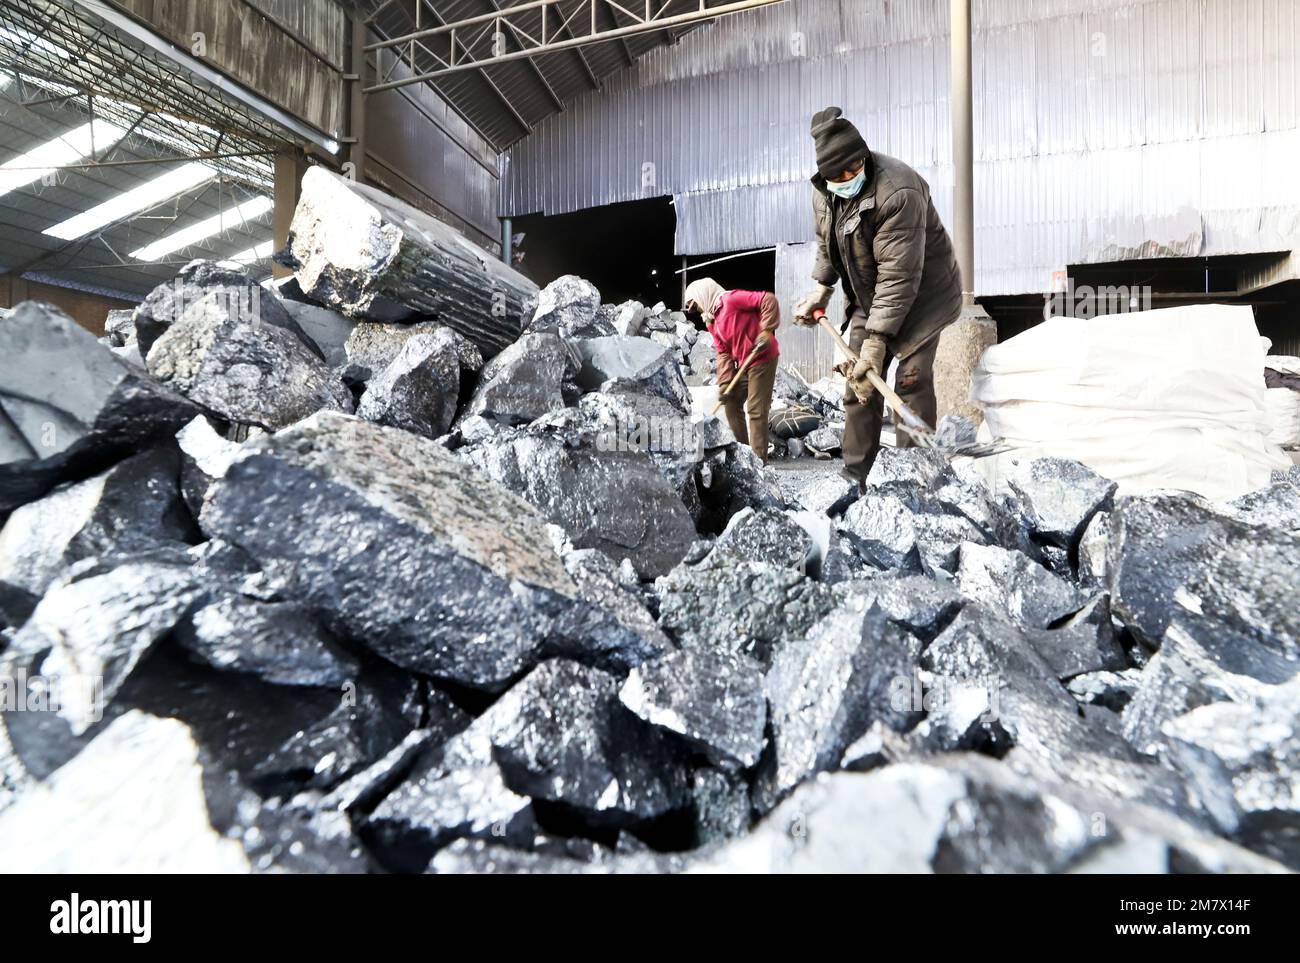 ZHANGYE, CHINA - JANUARY 10, 2023 - Workers crush metal silicon for packaging at a smelting plant in Zhangye city, Northwest China's Gansu province, J Stock Photo